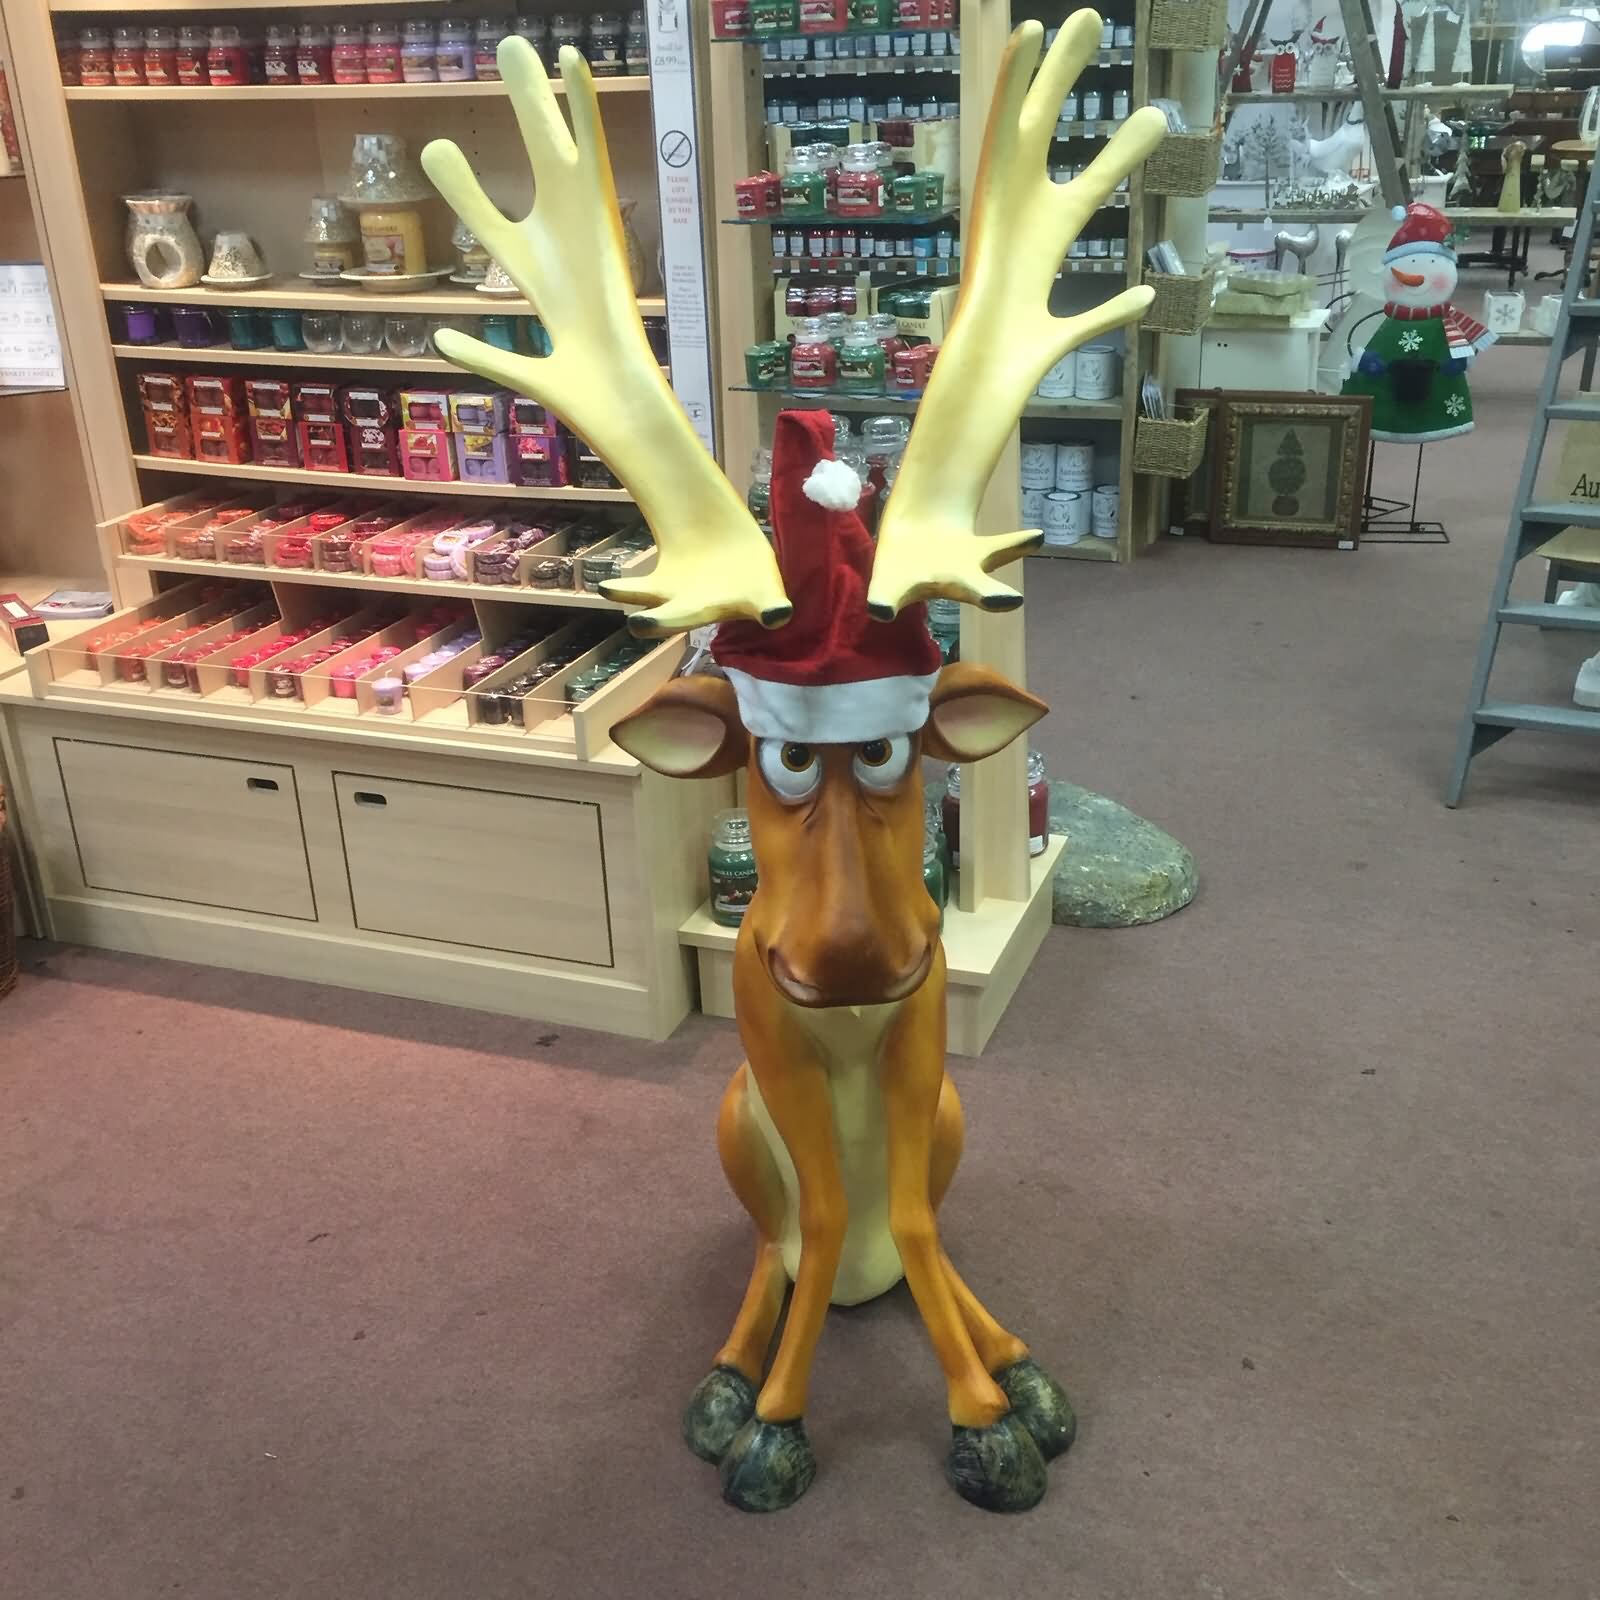 Funny Reindeer Shopping Picture